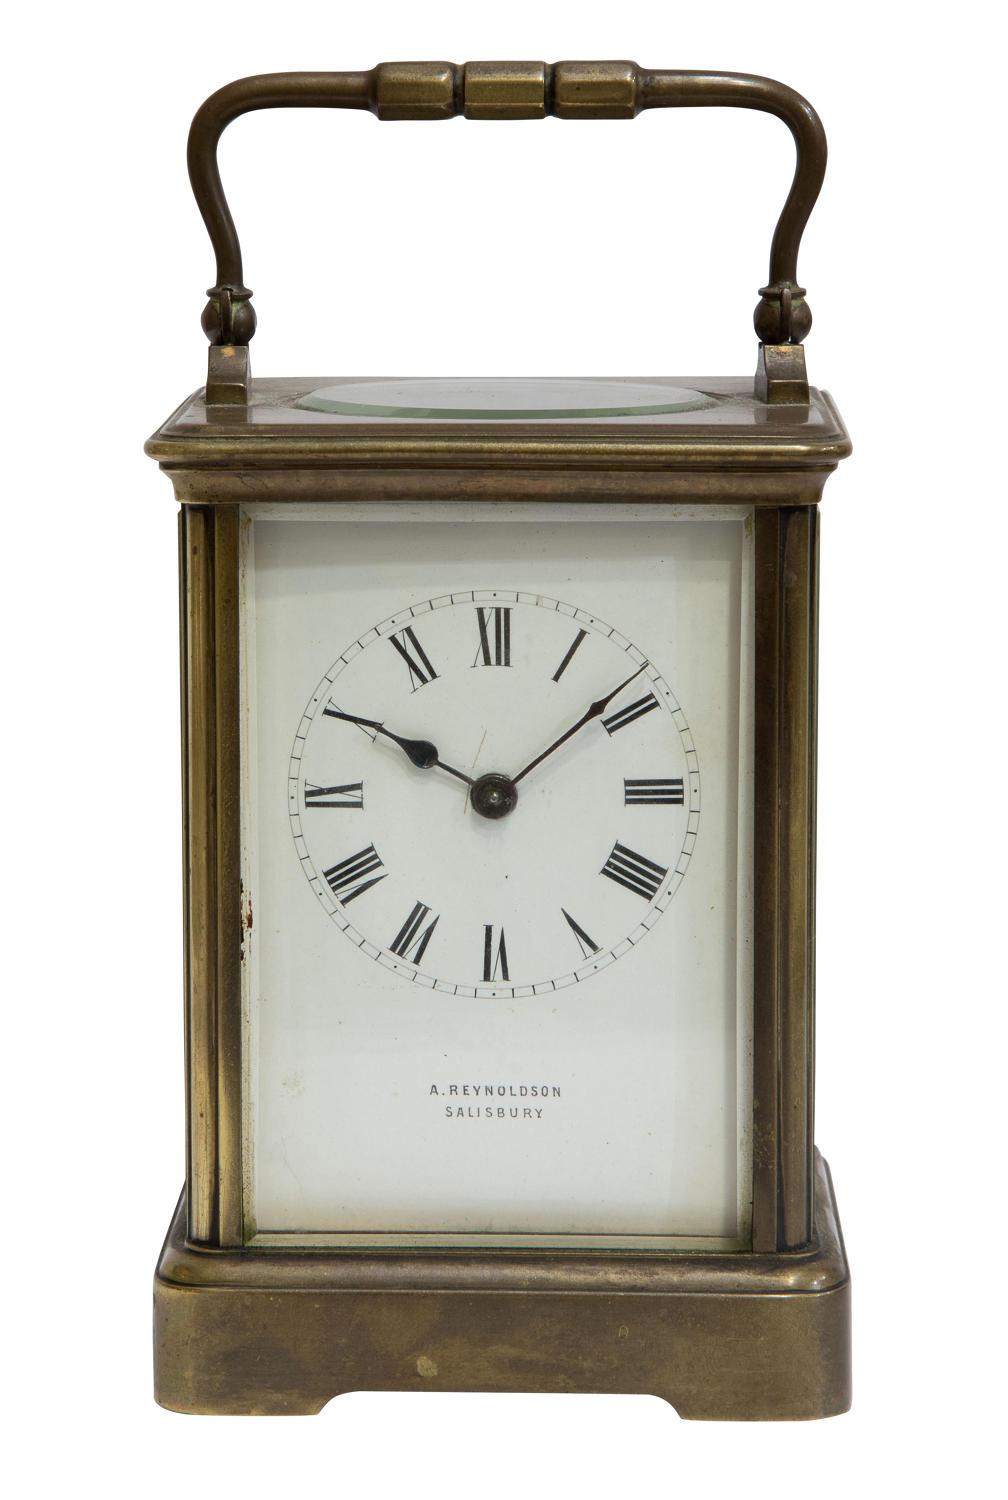 20th Century French Carriage Clock Timepiece with Enamel Dial by A. Reynoldson Salisbury